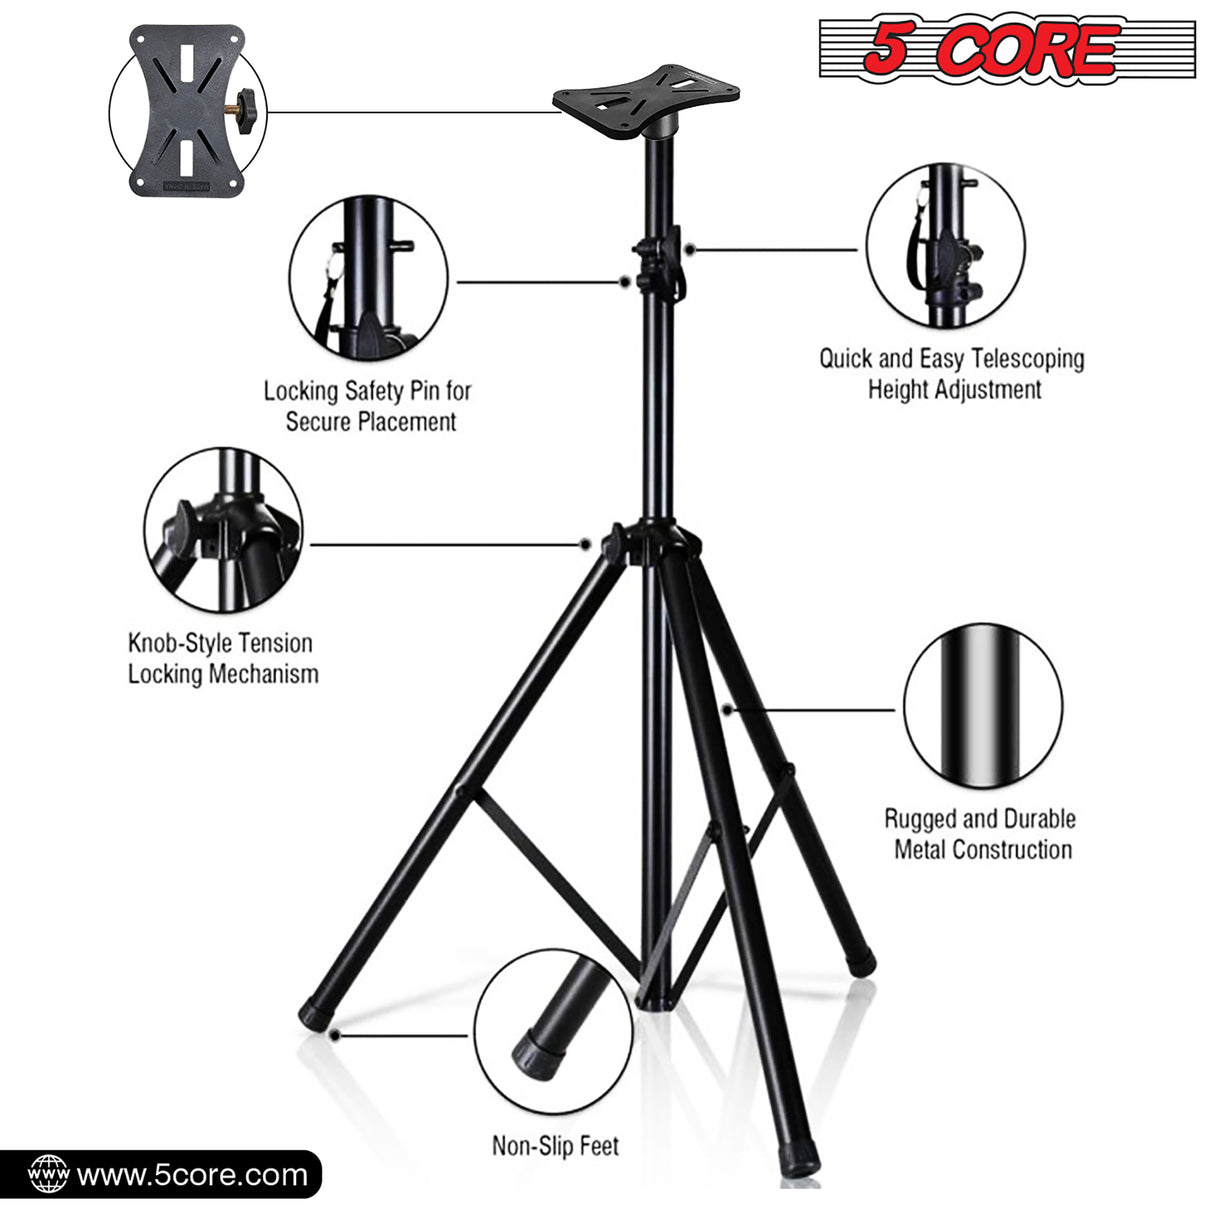 5 Core PA Speaker Stands Adjustable Height Professional DJ Tripod with Mounting Bracket, Extend from 40 to 72 inches, Black SS ECO 1PK